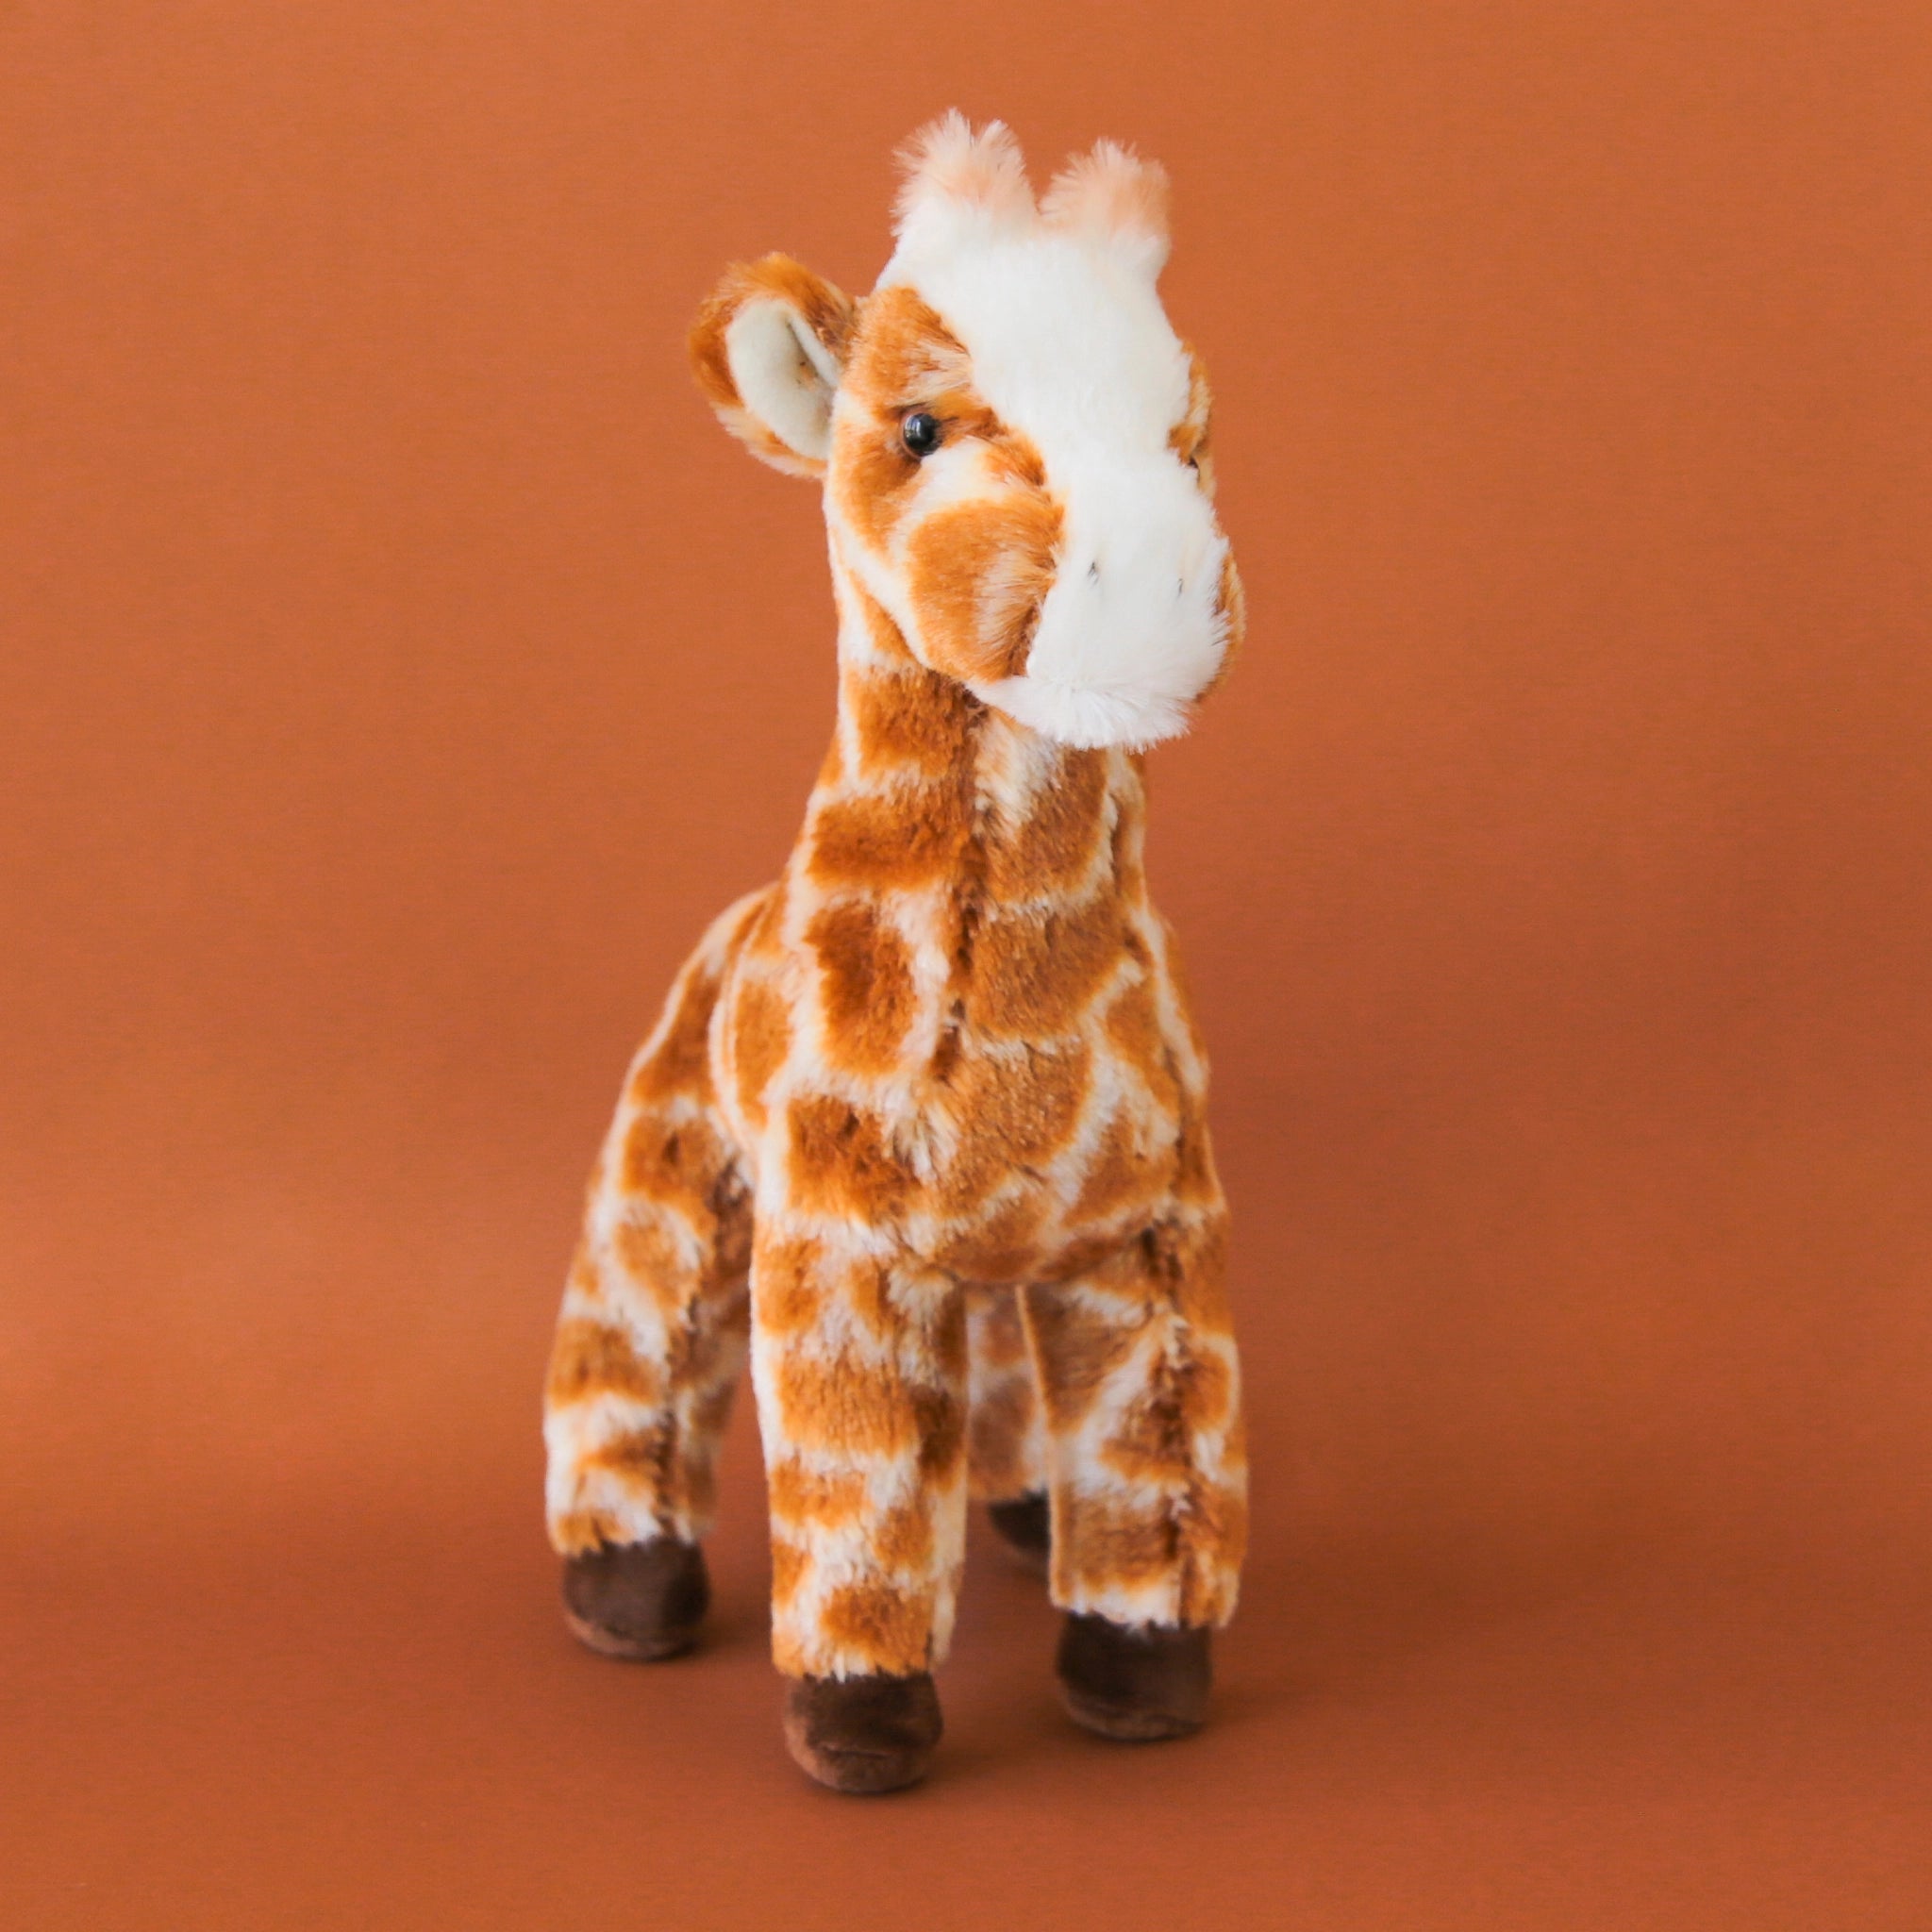 A brown and white giraffe stuffed animal toy with chocolate brown hooves.